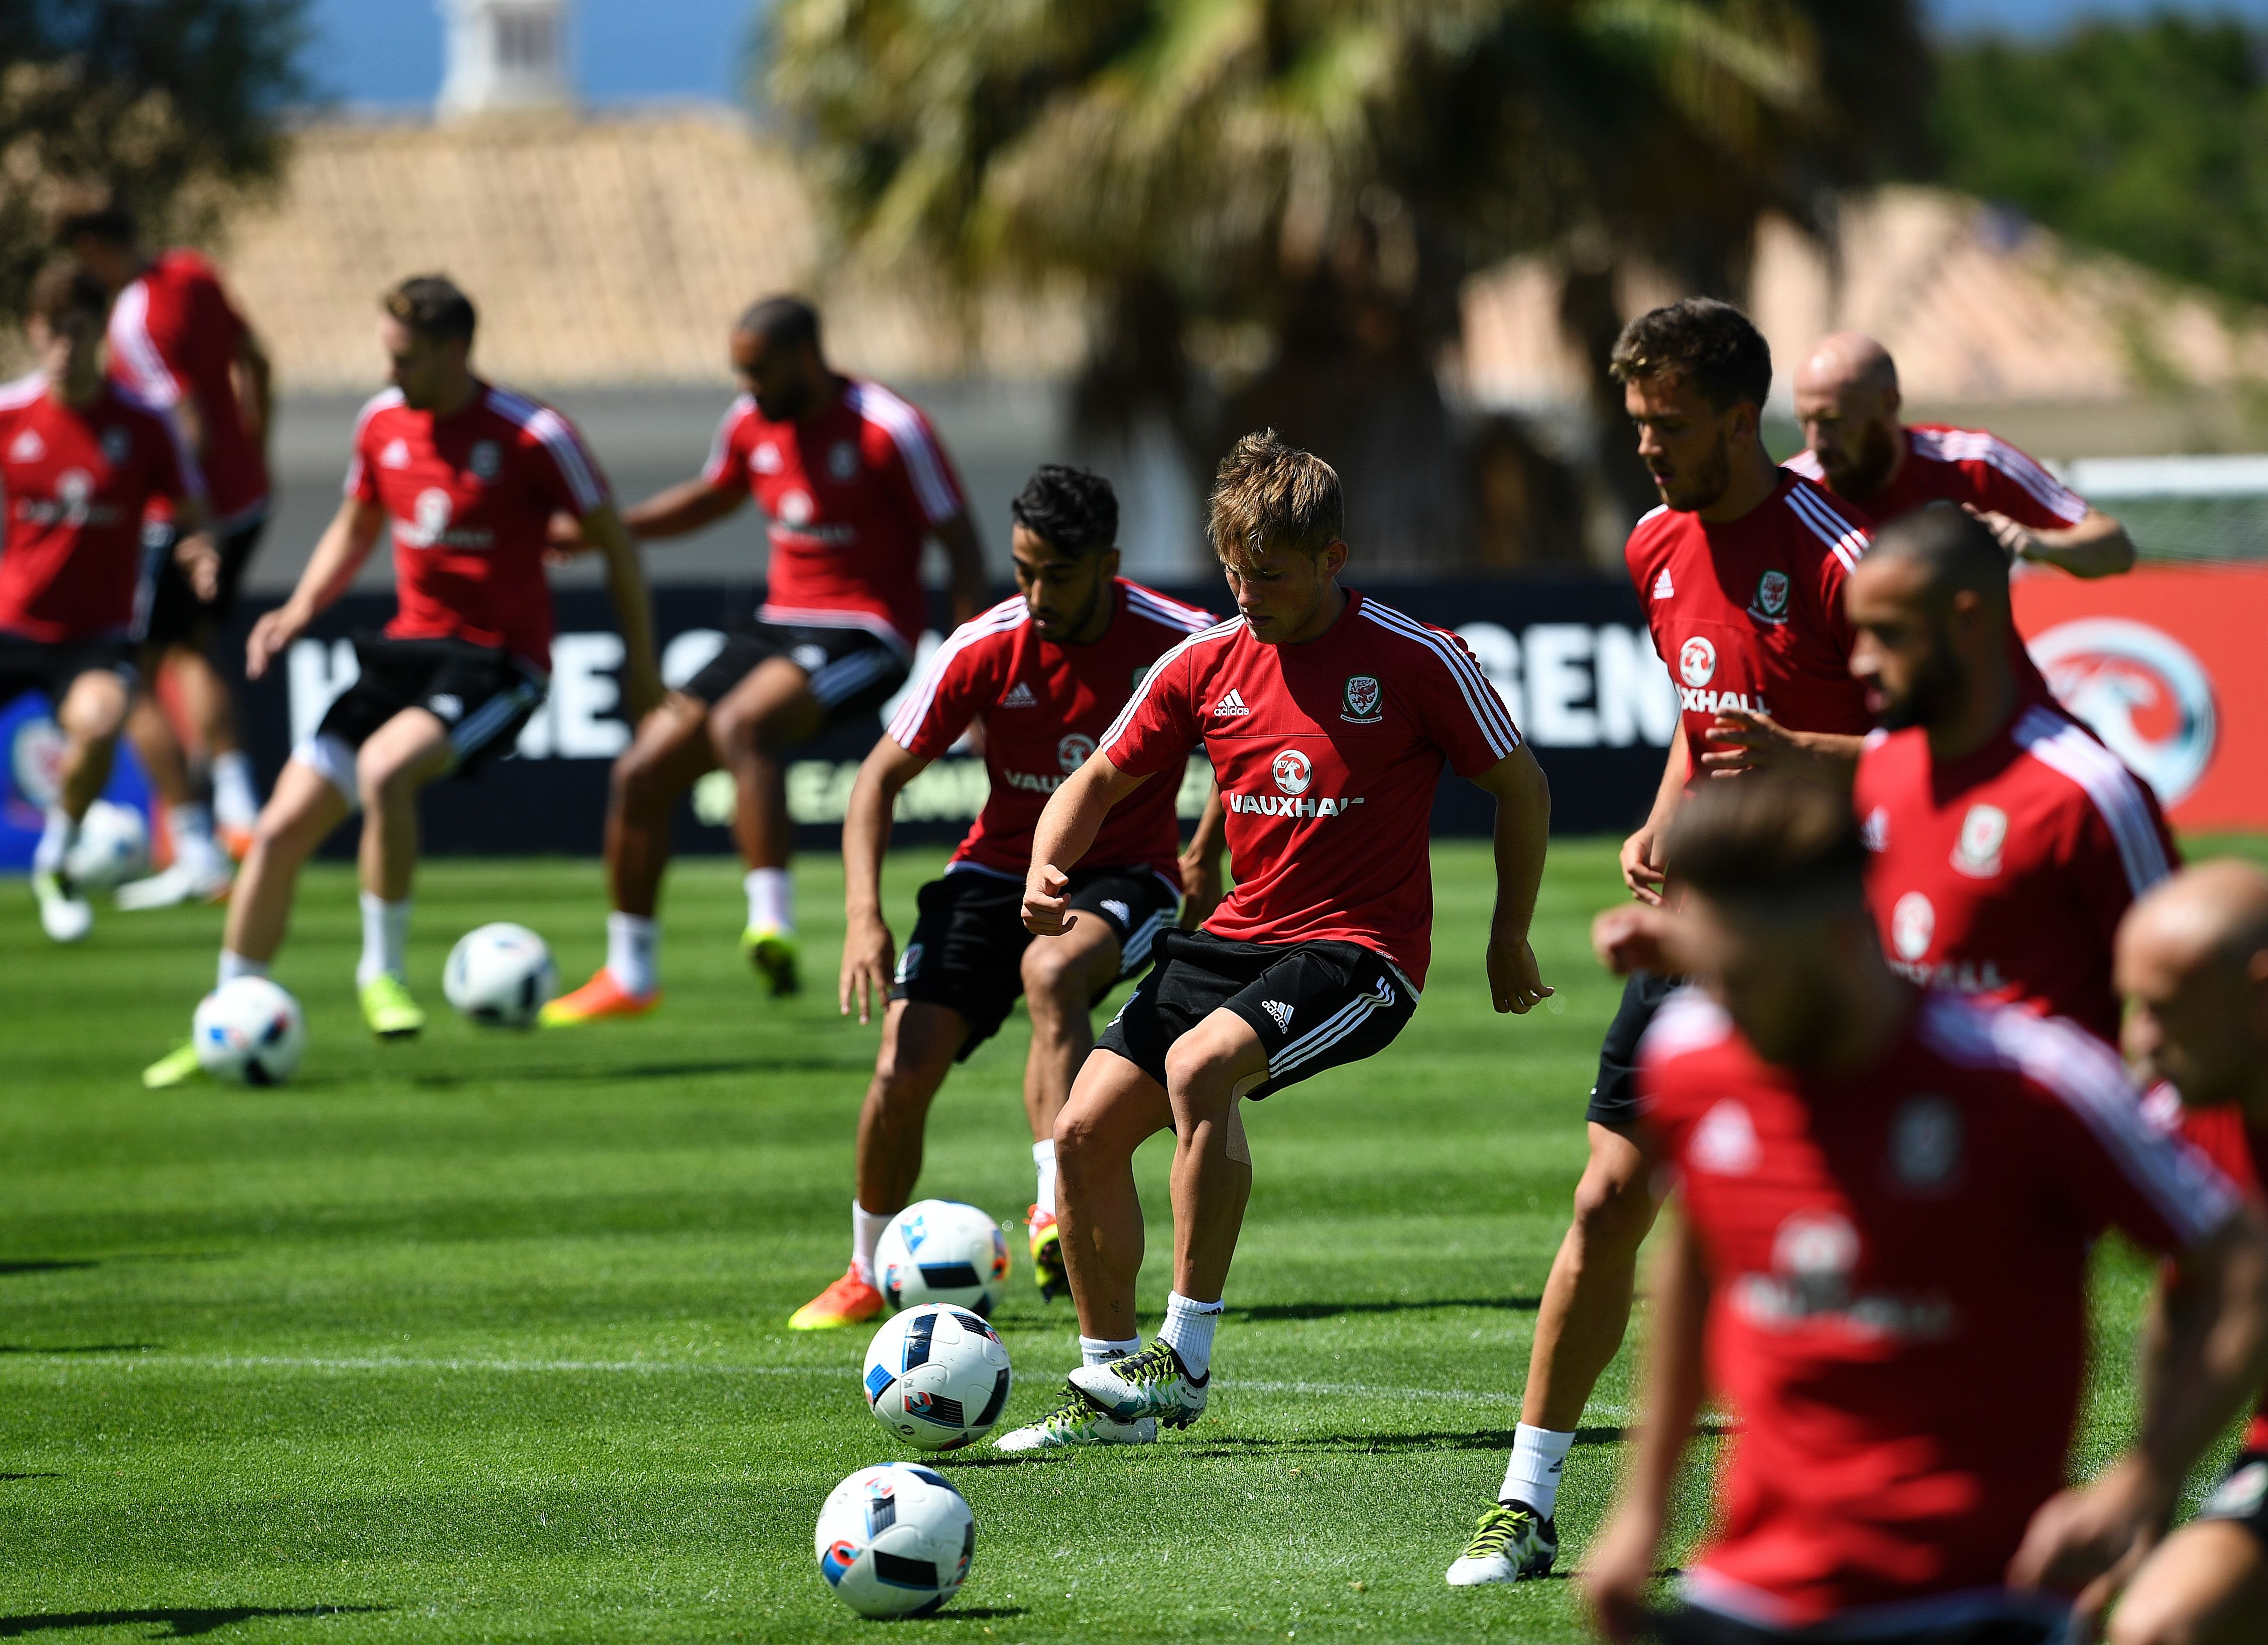 Welsh players take part in a training session at Vale do Lobo, near Almancil, on May 25, 2016. Wales squad is in Portugal for a five-day training camp in preparation for the upcoming EURO 2016 tournament. / AFP / FRANCISCO LEONG        (Photo credit should read FRANCISCO LEONG/AFP/Getty Images)